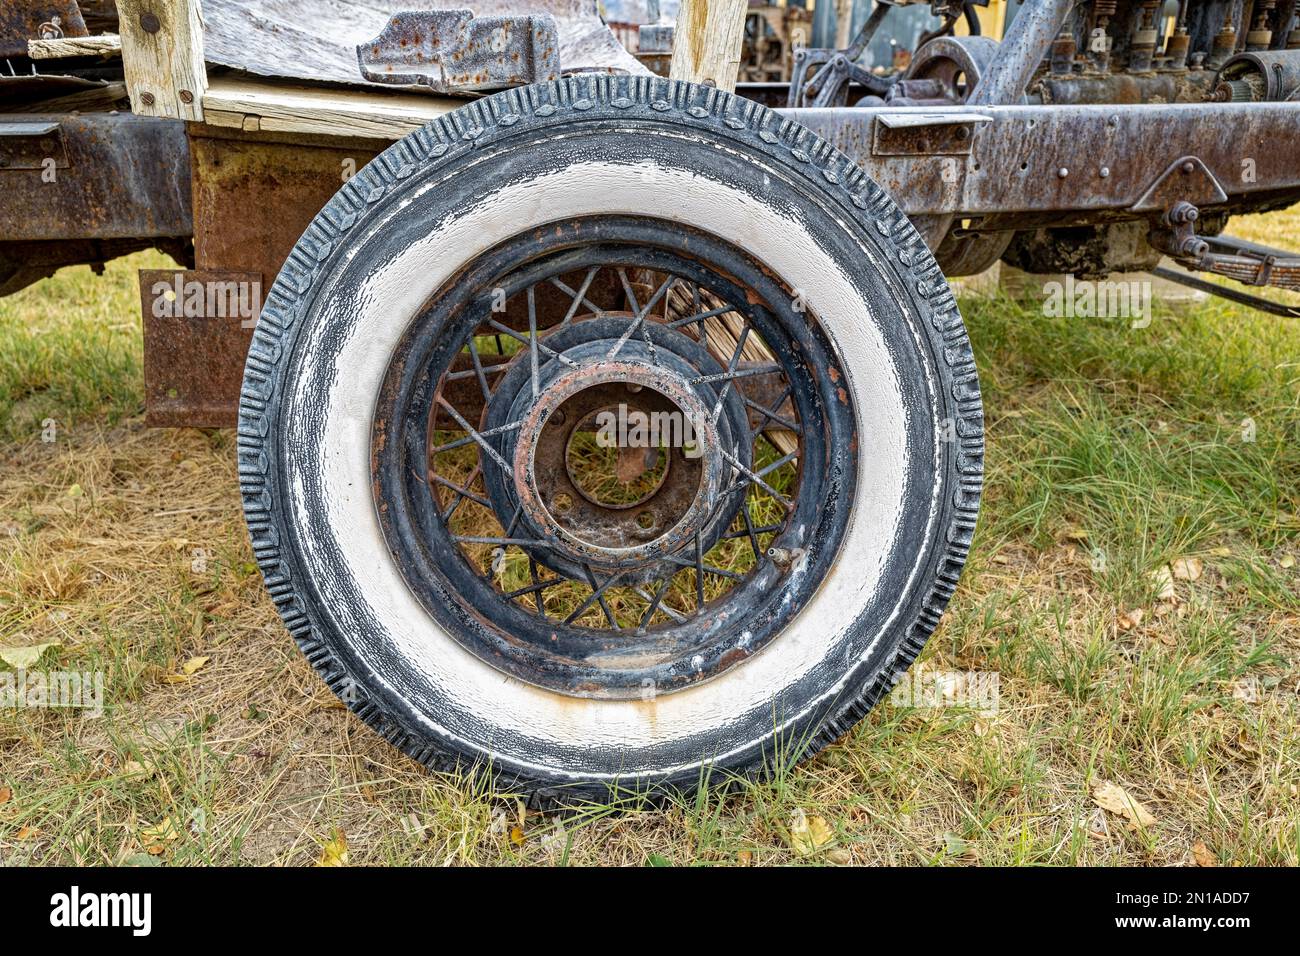 An antique whitewall tire with spokes resting in grass Stock Photo